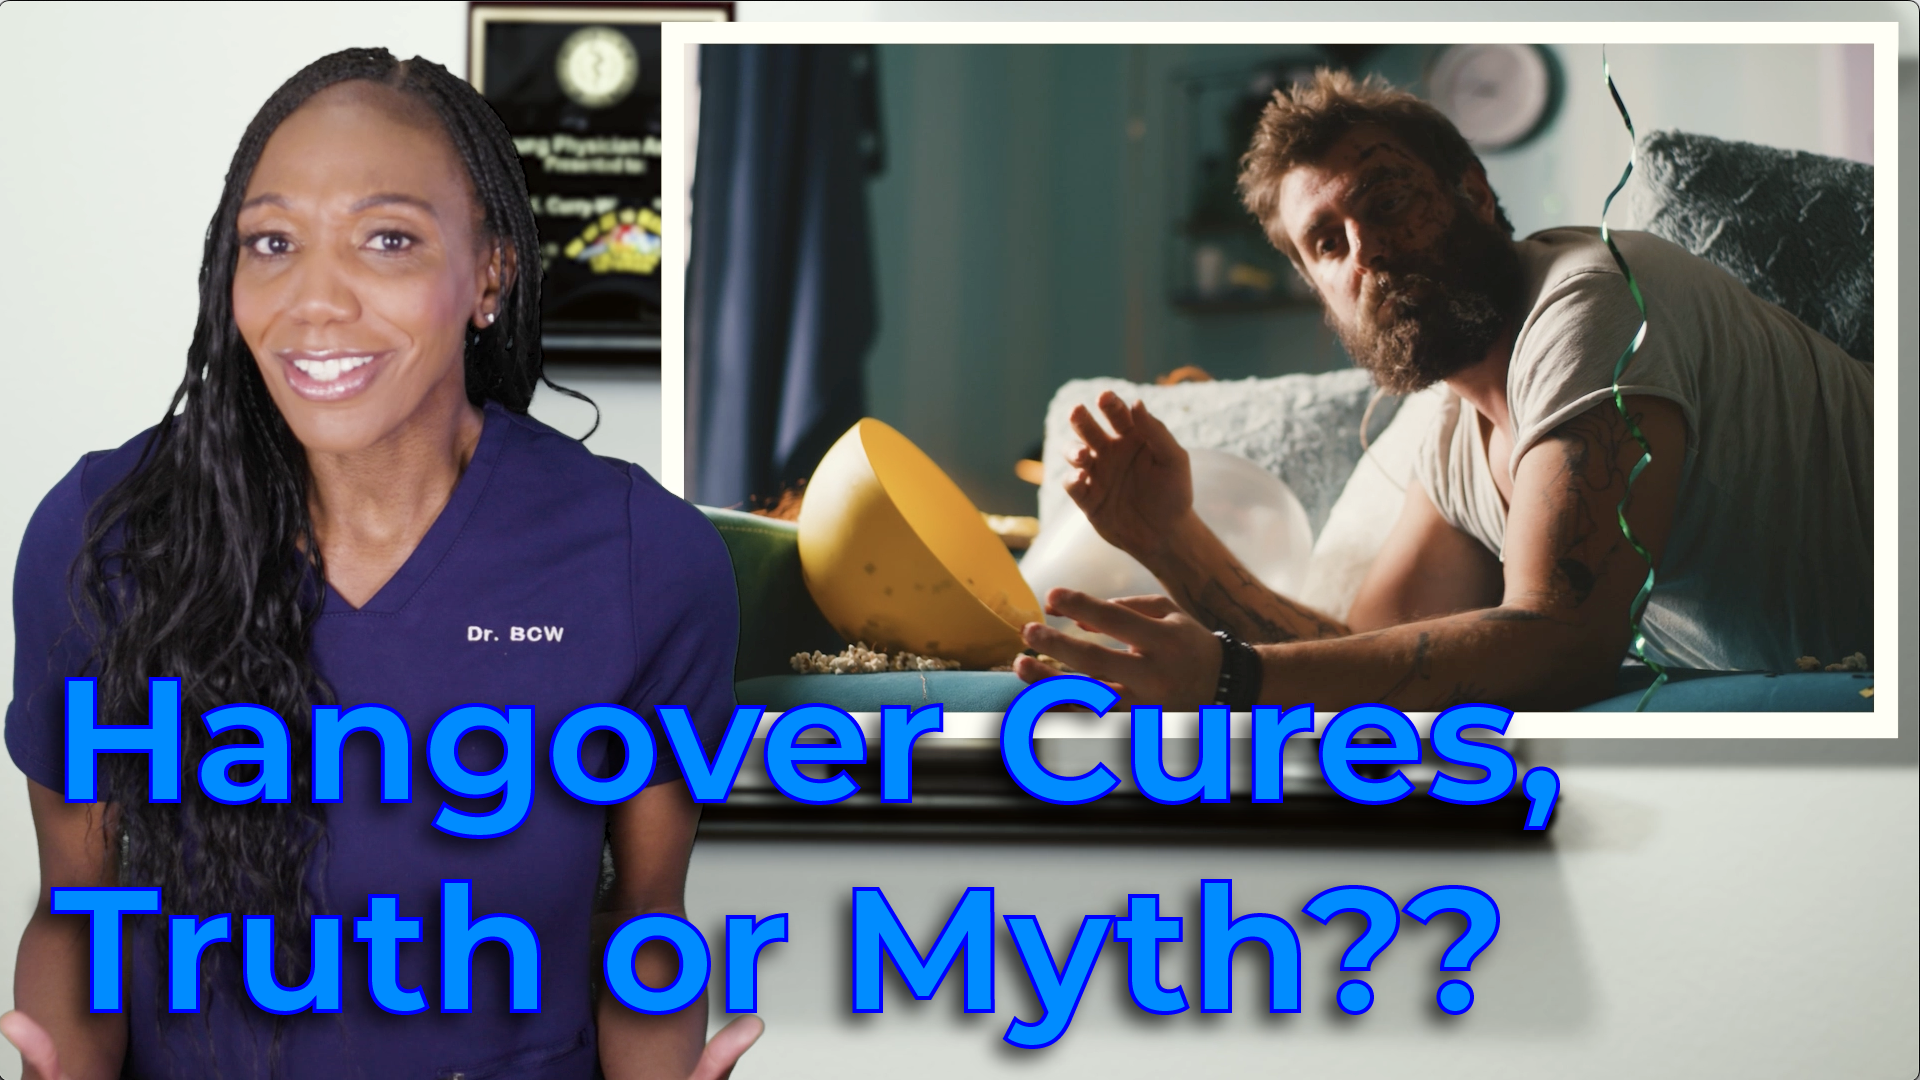 Hangover Cures Truth or Myth, Dr. BCW, beyond clinical walls